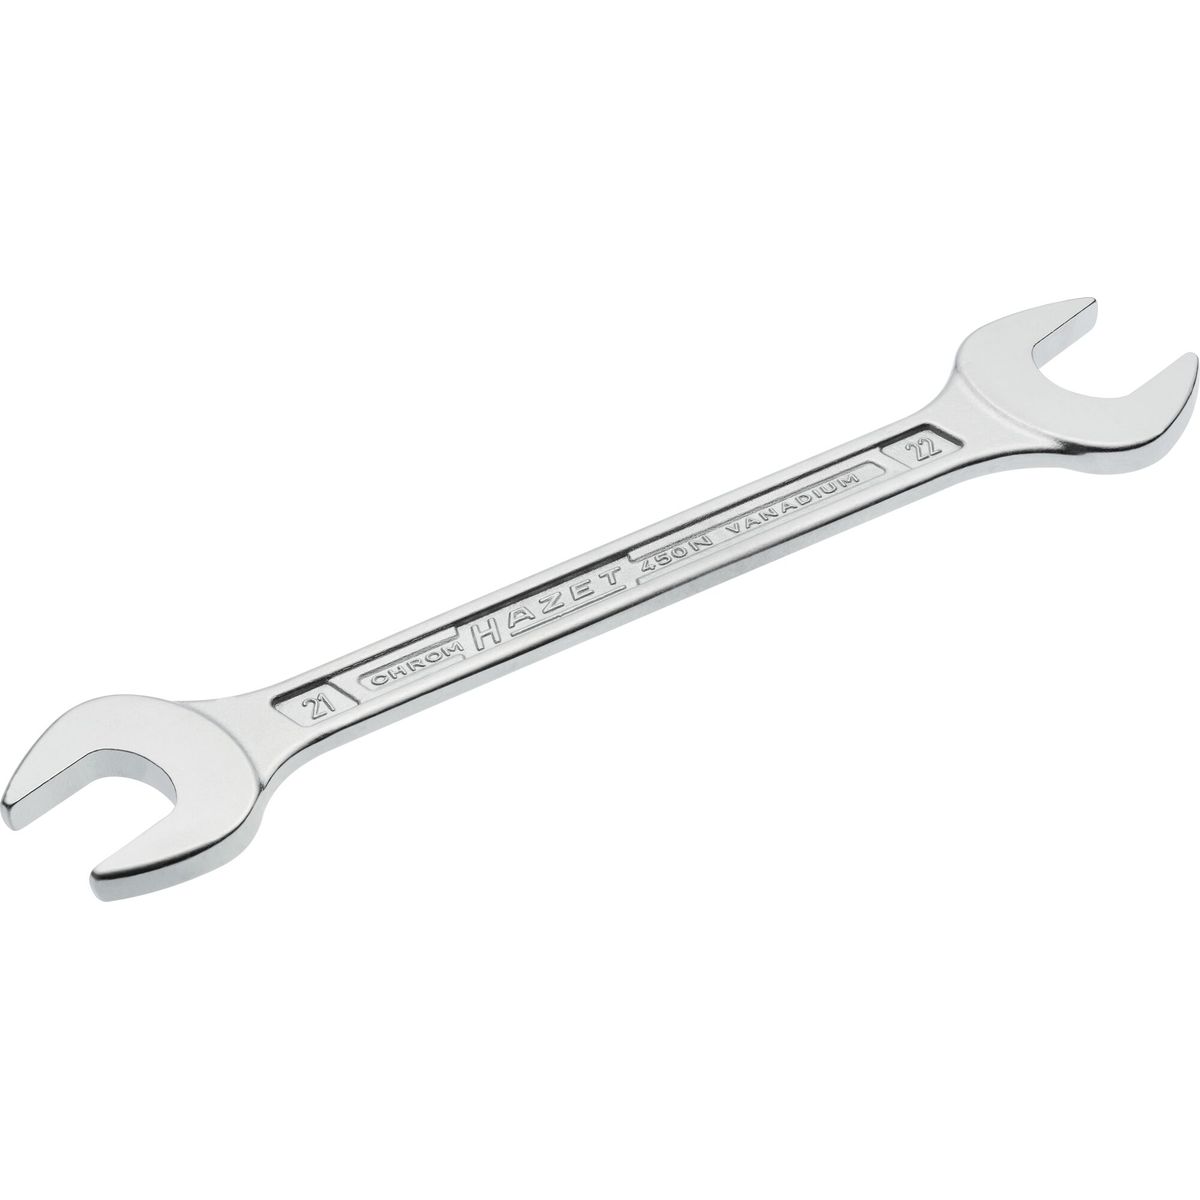 Double Open-End Wrench No.450N-21x22 Hazet®